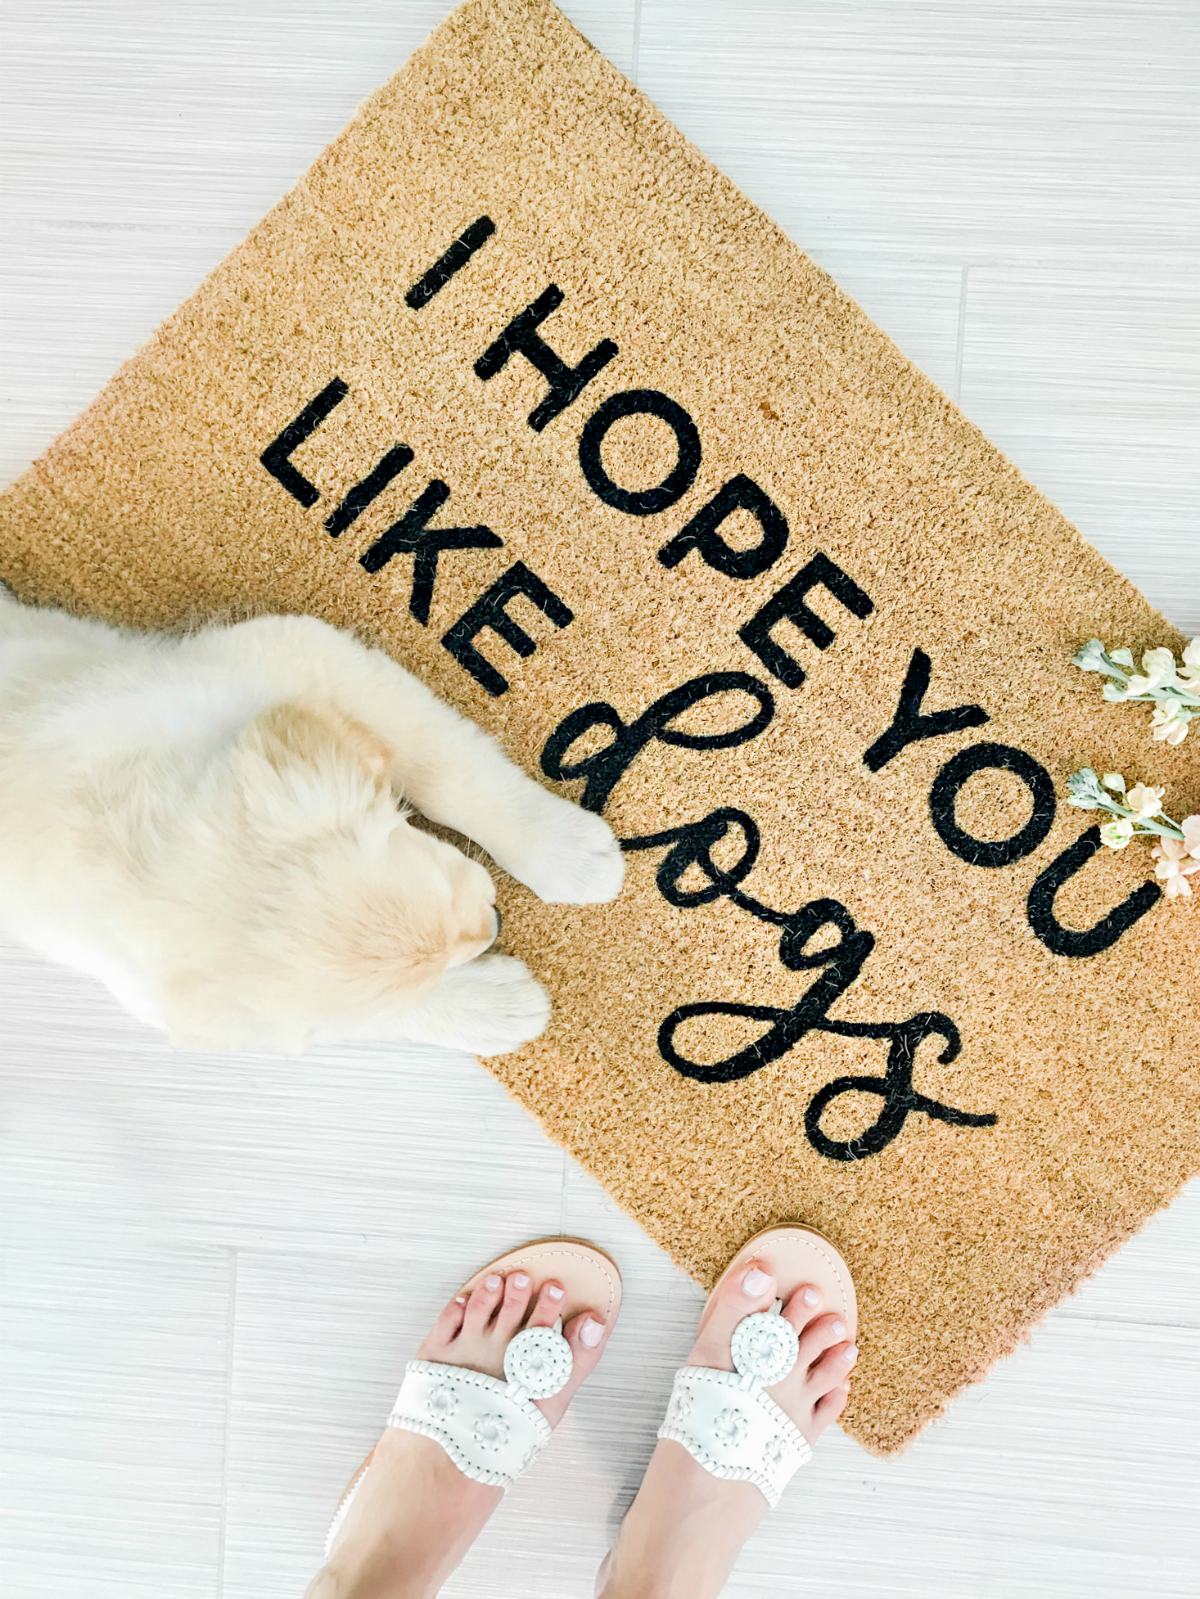 I Hope You Like Dogs doormat, Freshpet dog food review, Woman's Best Friend: 8 Reasons to Get a Puppy by southern lifestyle blogger Stephanie Ziajka from Diary of a Debutante, how a new golden retriever puppy can help if you're depressed in a new city, 8 reasons to get a puppy, 8 reasons why you should get a dog, 4 month old golden retriever puppy pictures